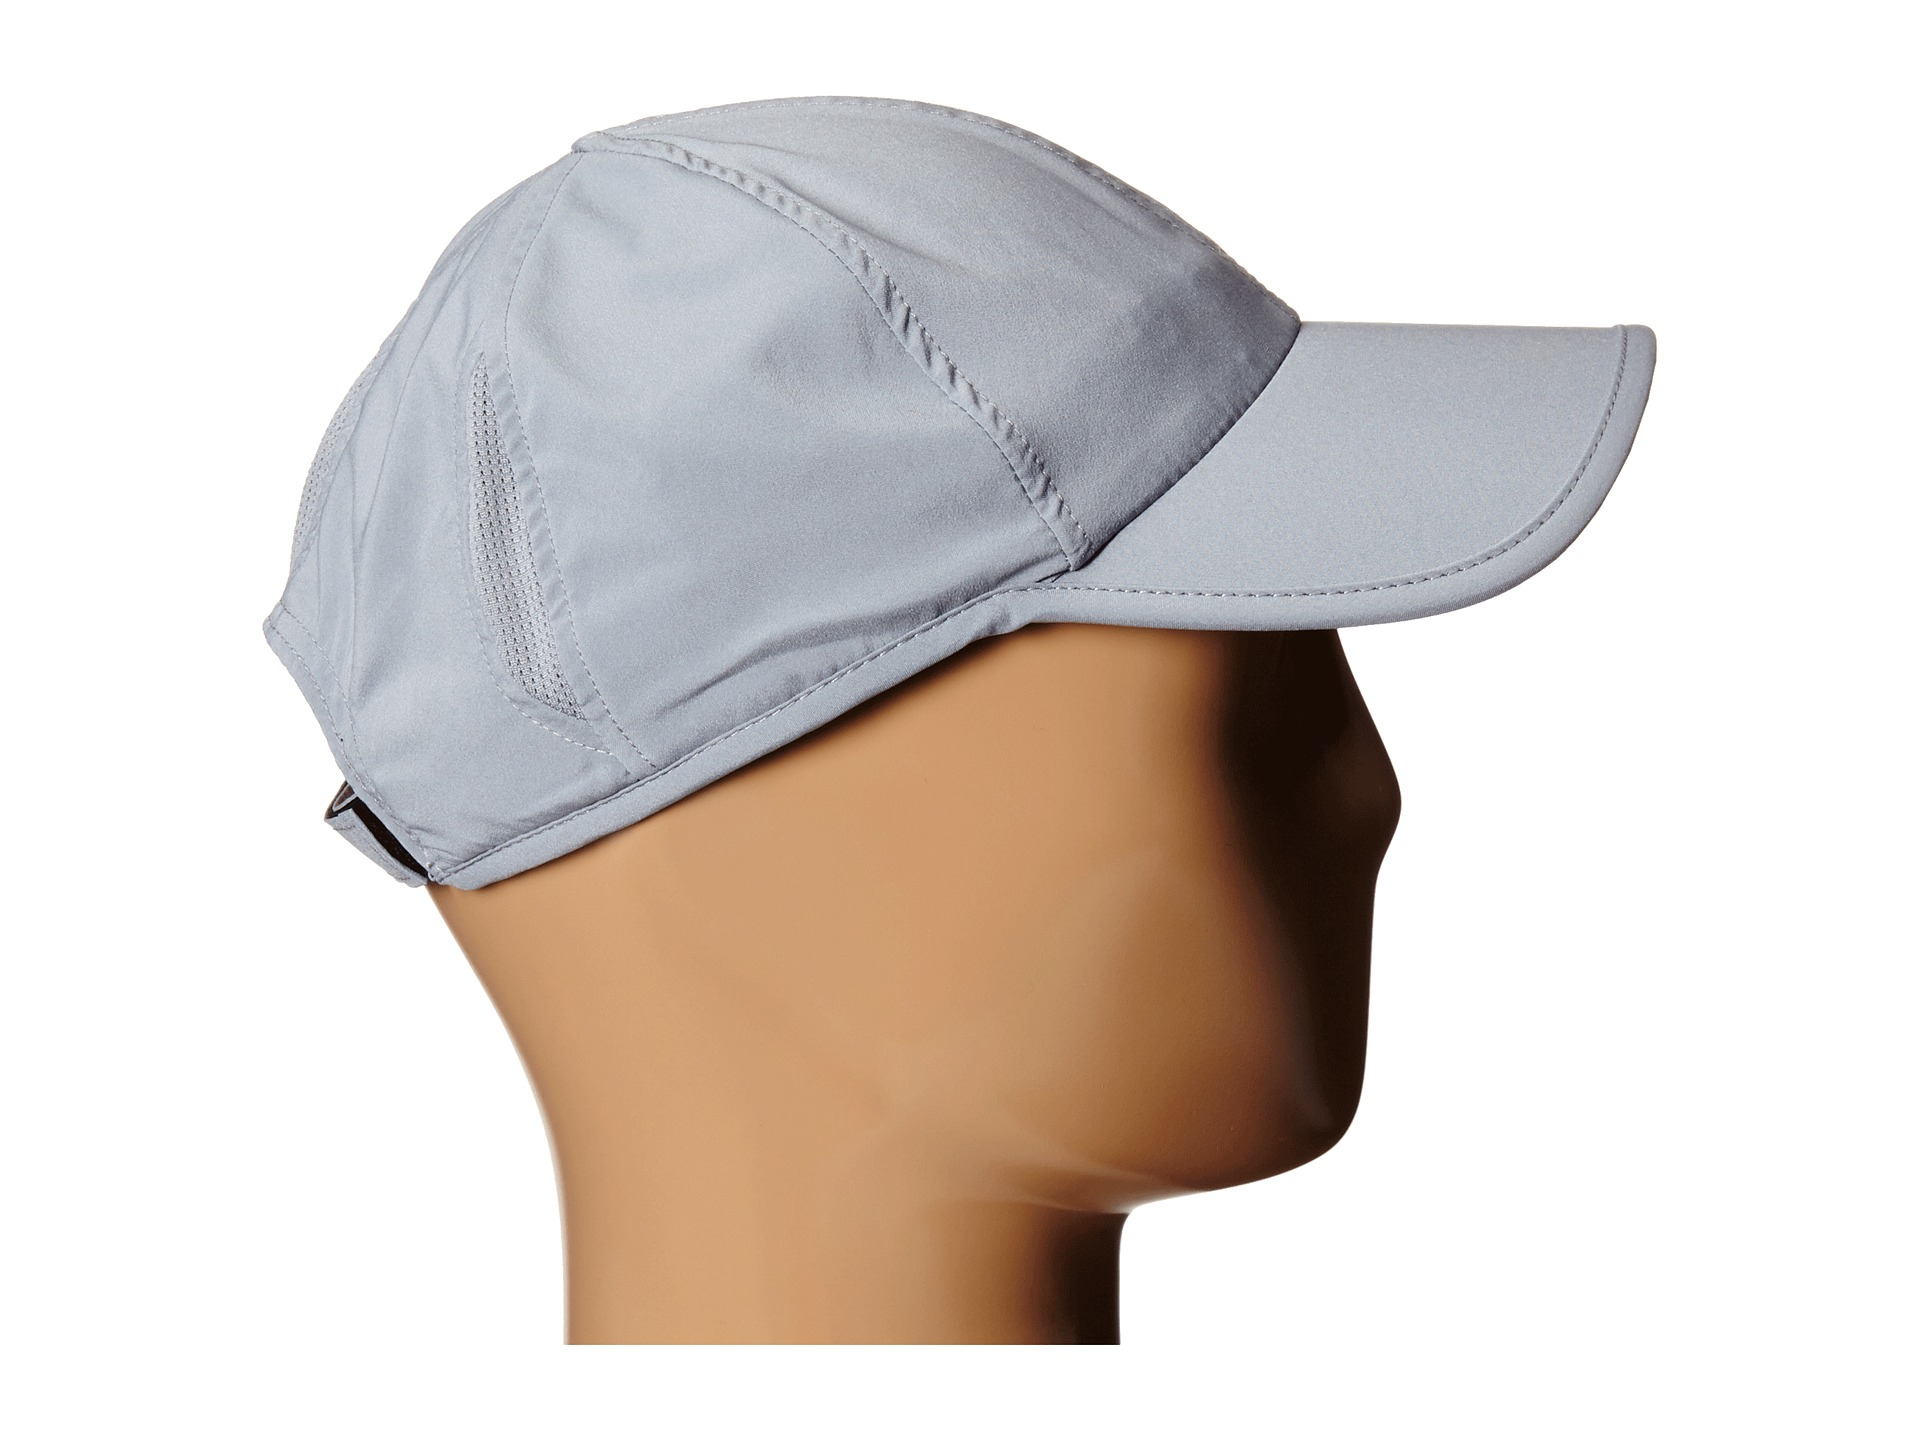 The North Face Synthetic Breakaway Hat in Gray for Men - Lyst